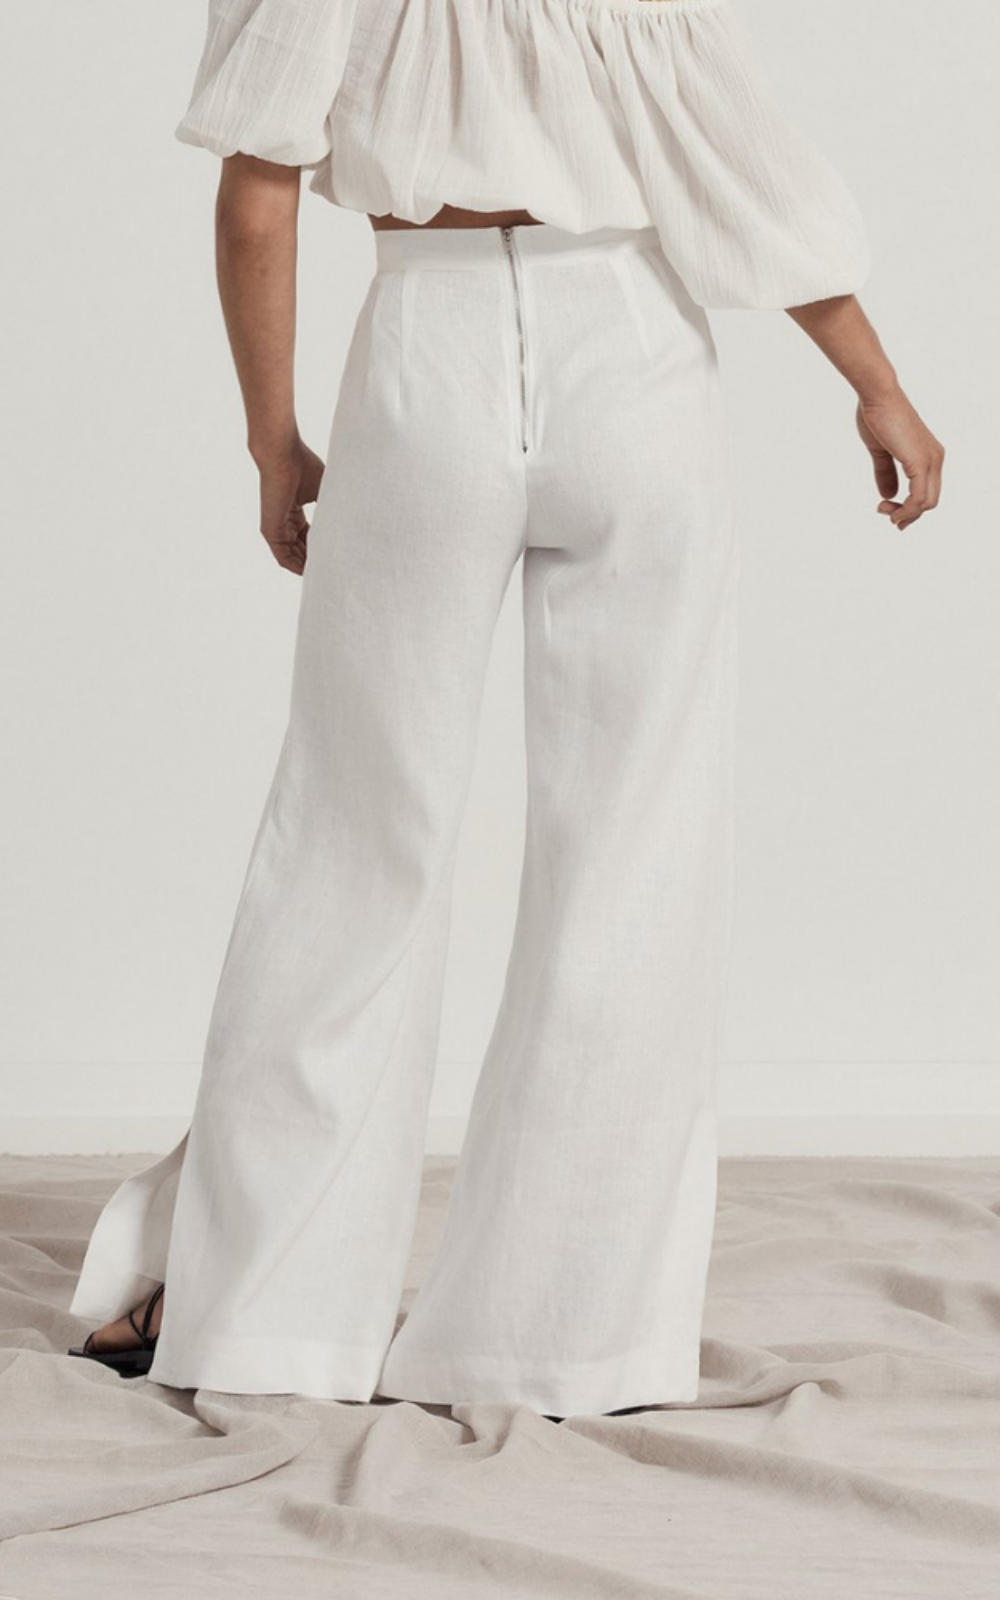 Chanel Flares - White